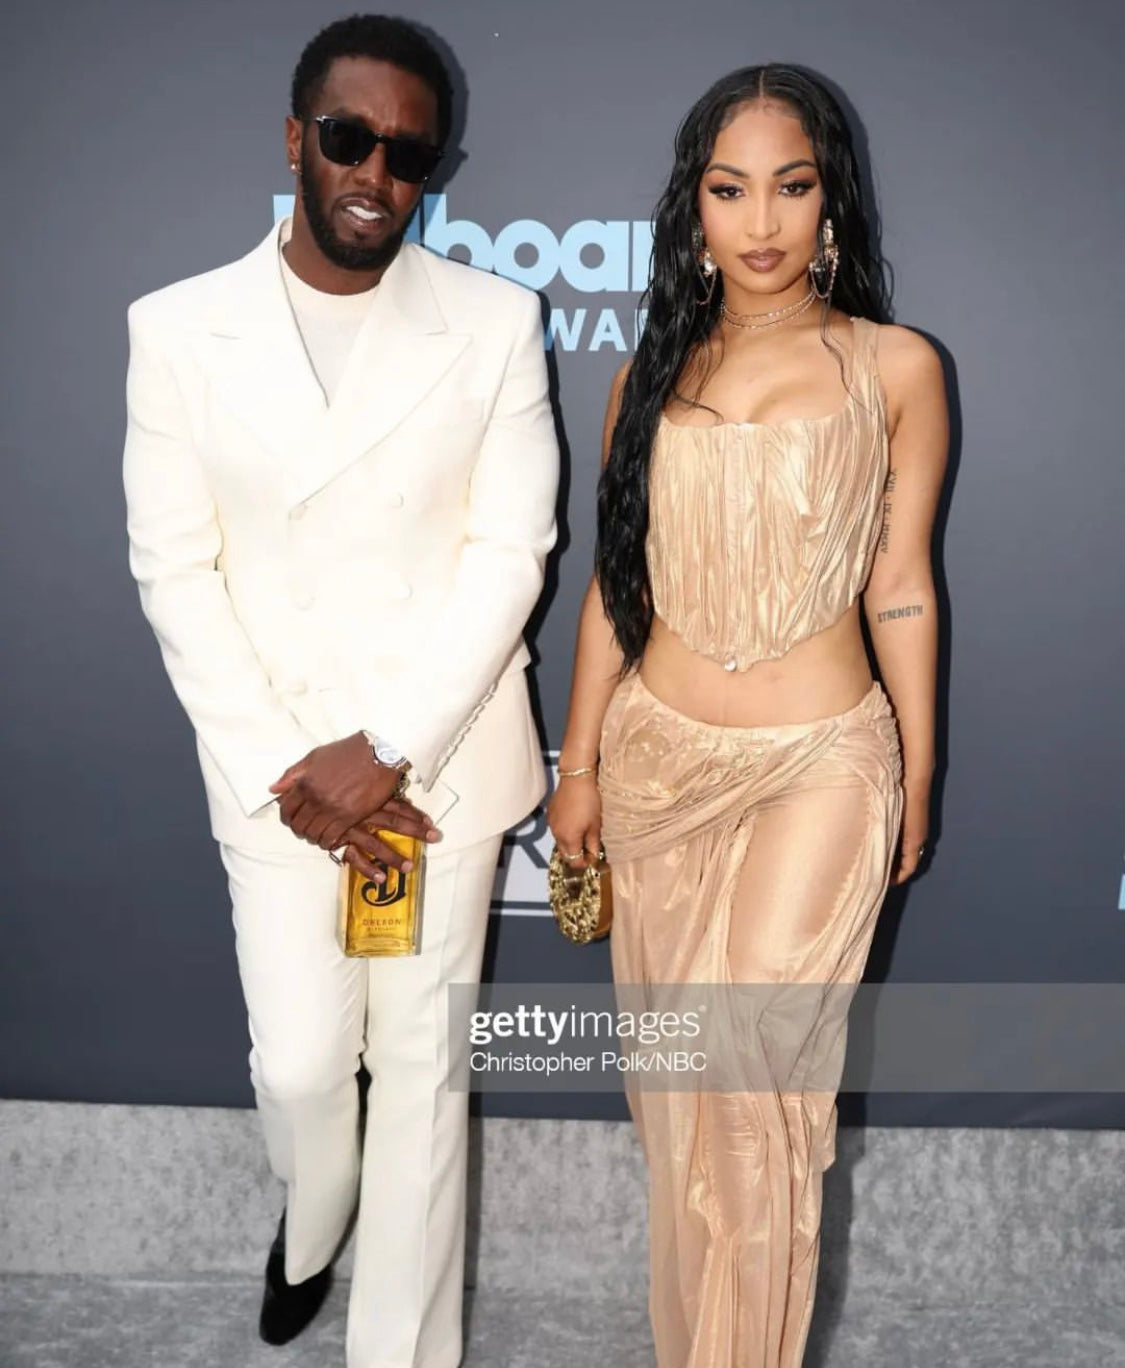 Diddy and Sehenseea clutching Blumera at the Billboard Music Awards